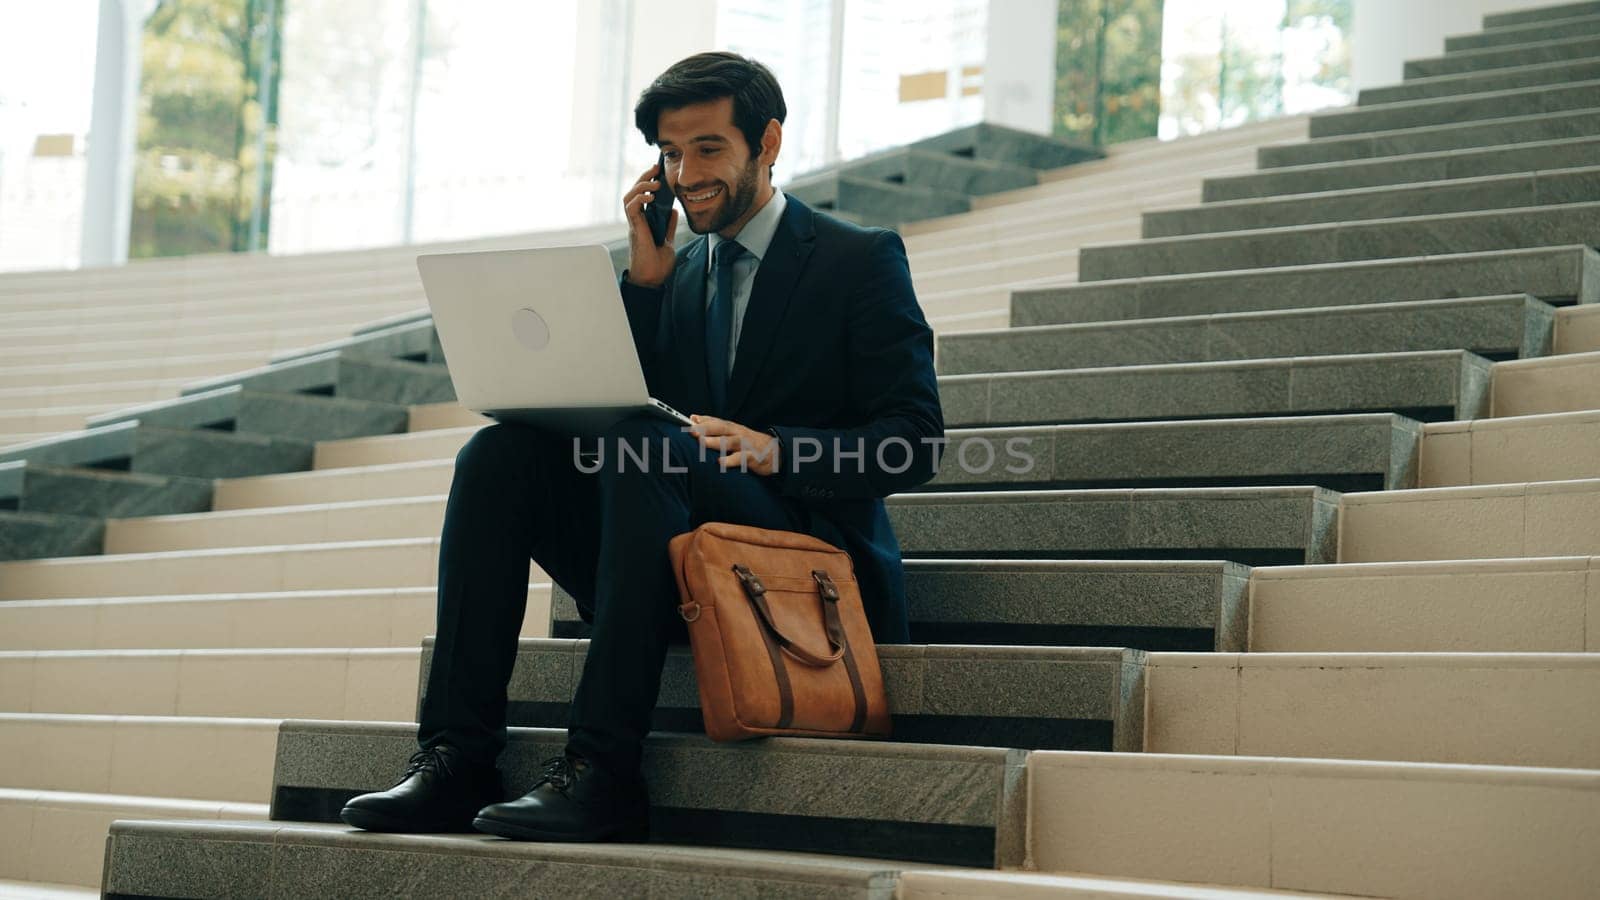 Skilled investor working or planing strategy by using laptop at stair. Professional business man wearing suit while working and typing data analysis by using laptop and talking to phone. Exultant.